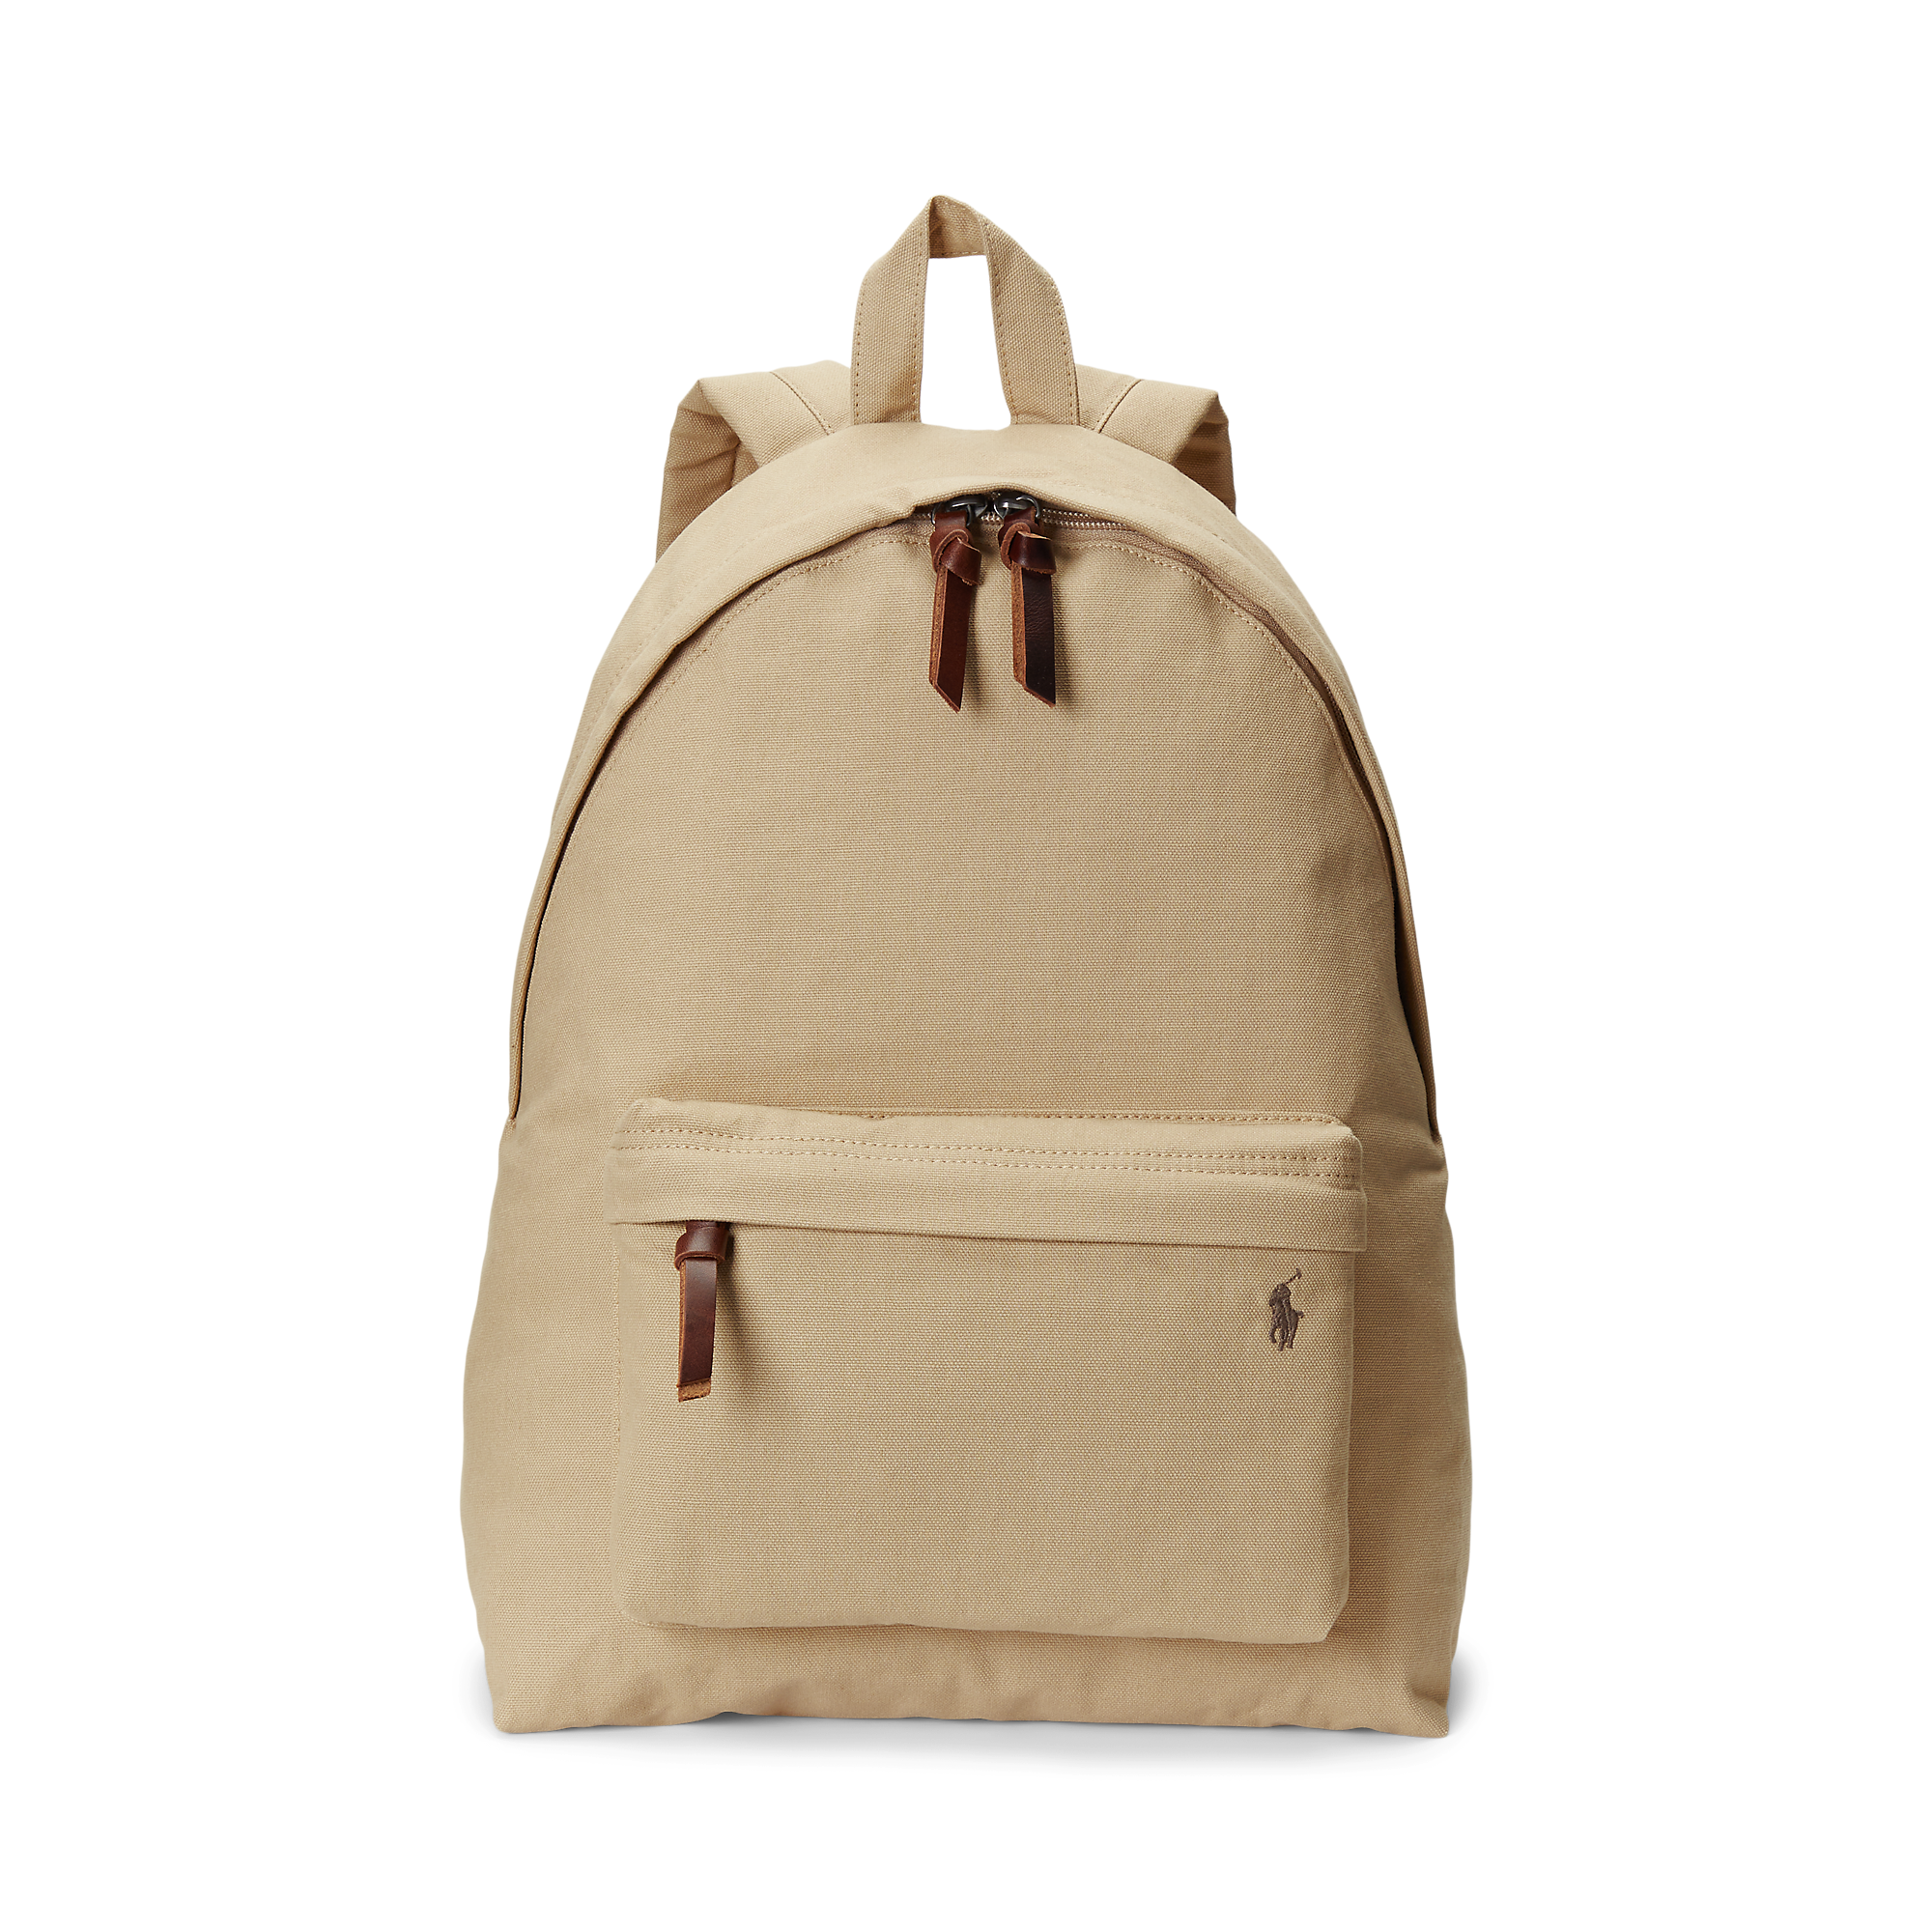 Mens canvas backpack